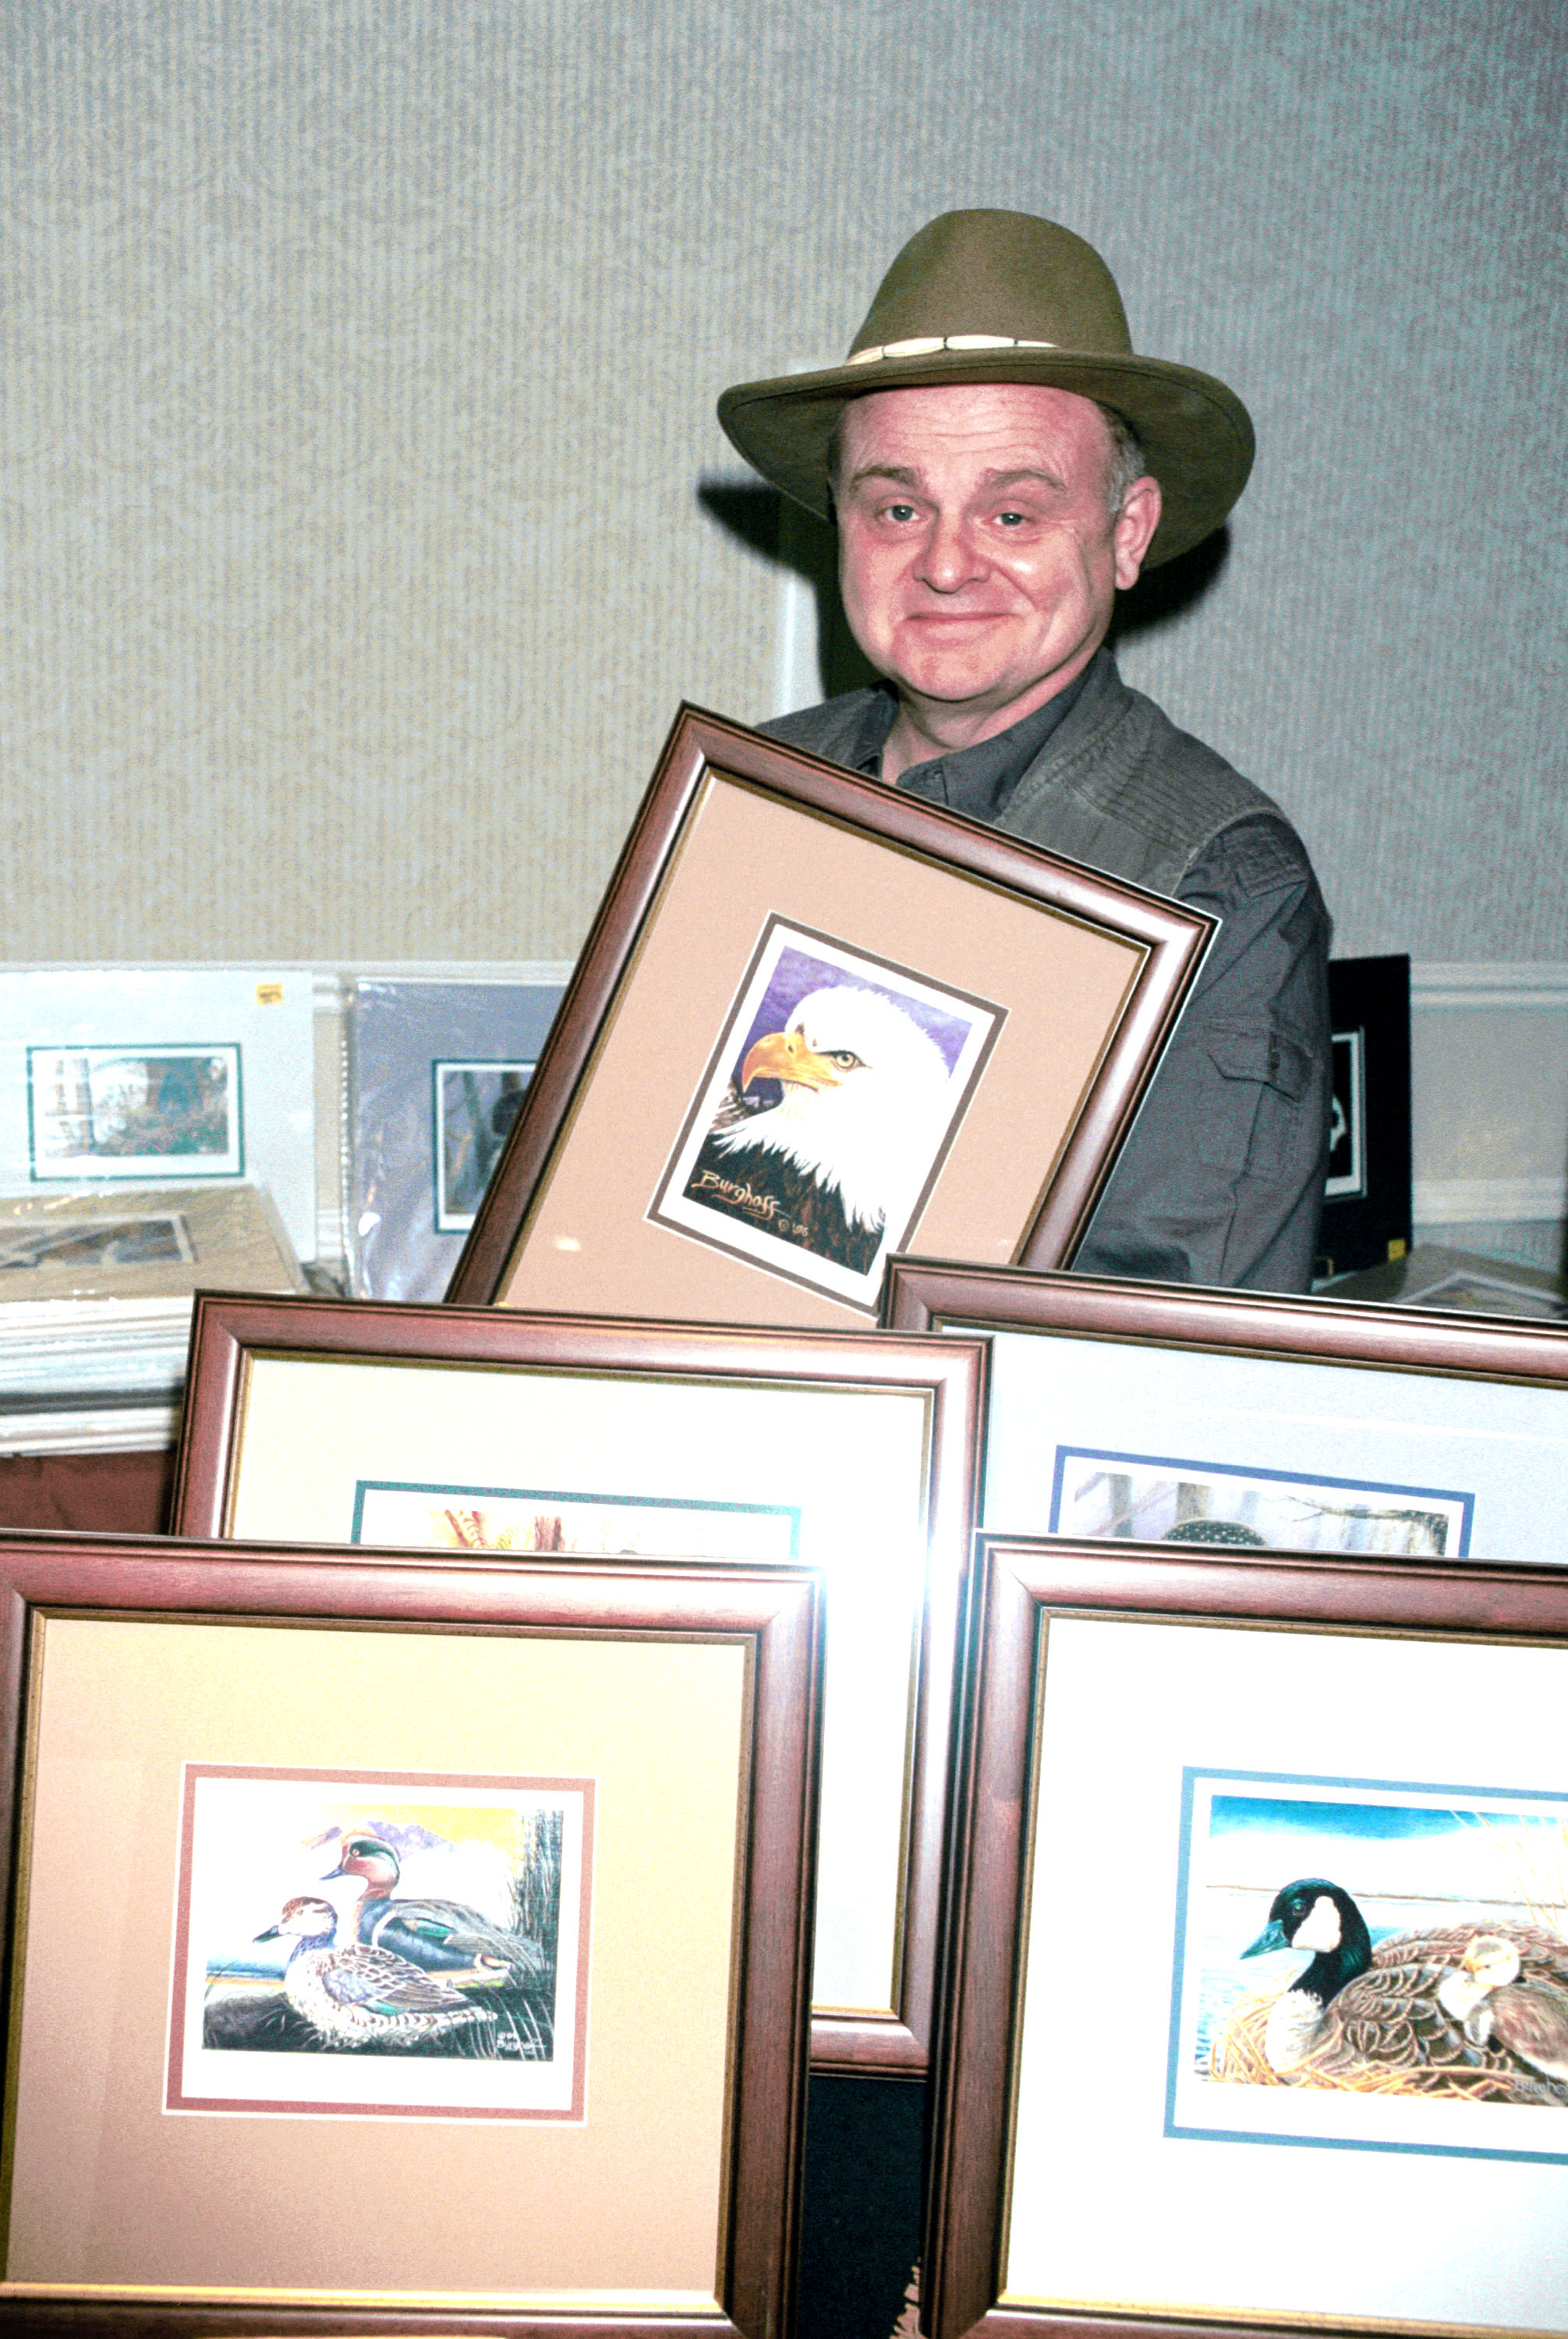 Gary Burghoff besucht die "Hollywood Collectors and Celebrities Show" am 7. April 2001 in North Hollywood | Quelle: Getty Images